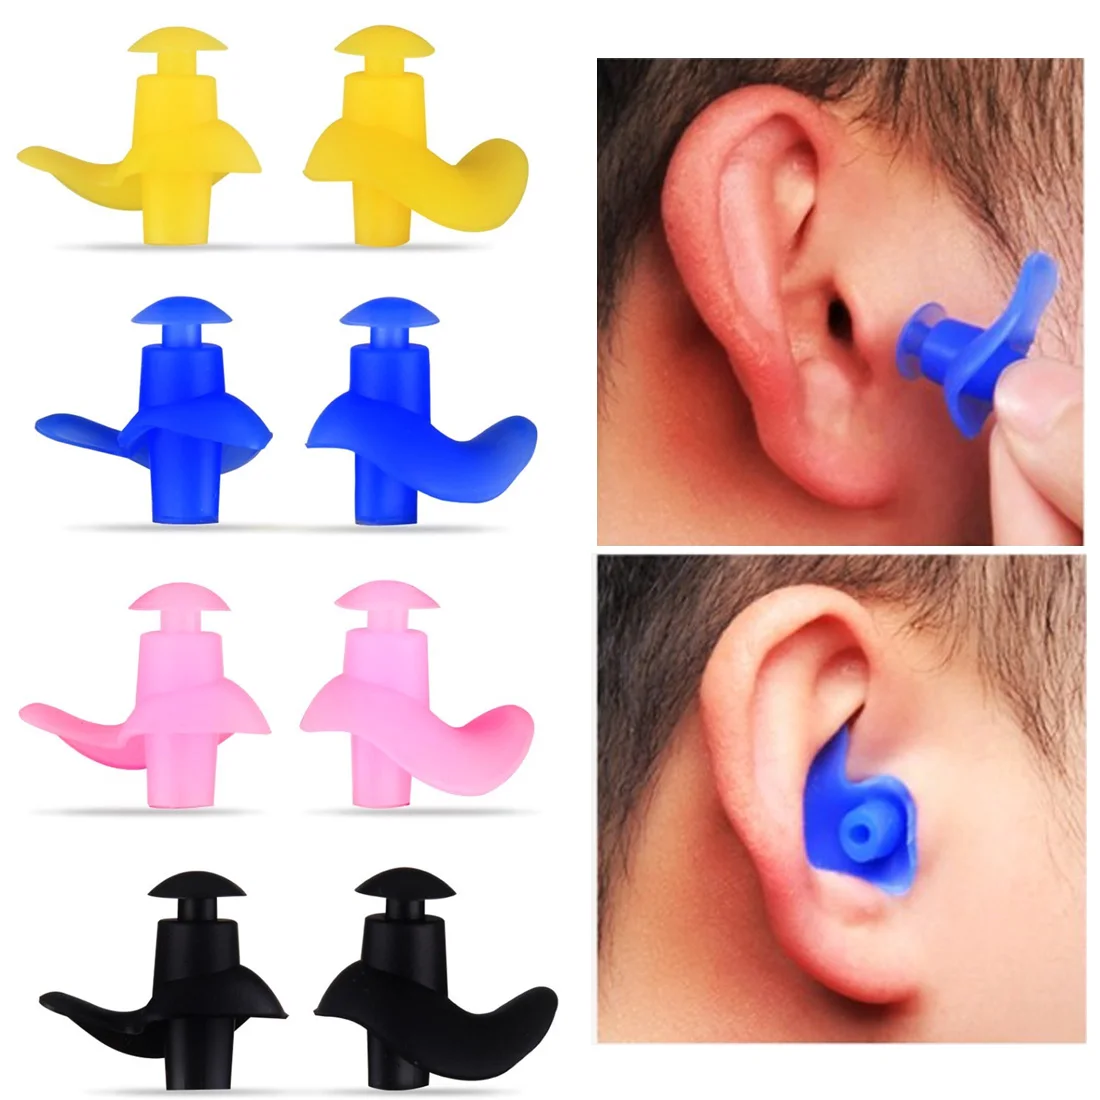 Beco Flex Ear Plugs Moldable Silicone Swimming Earplugs 2 Pairs with Case 